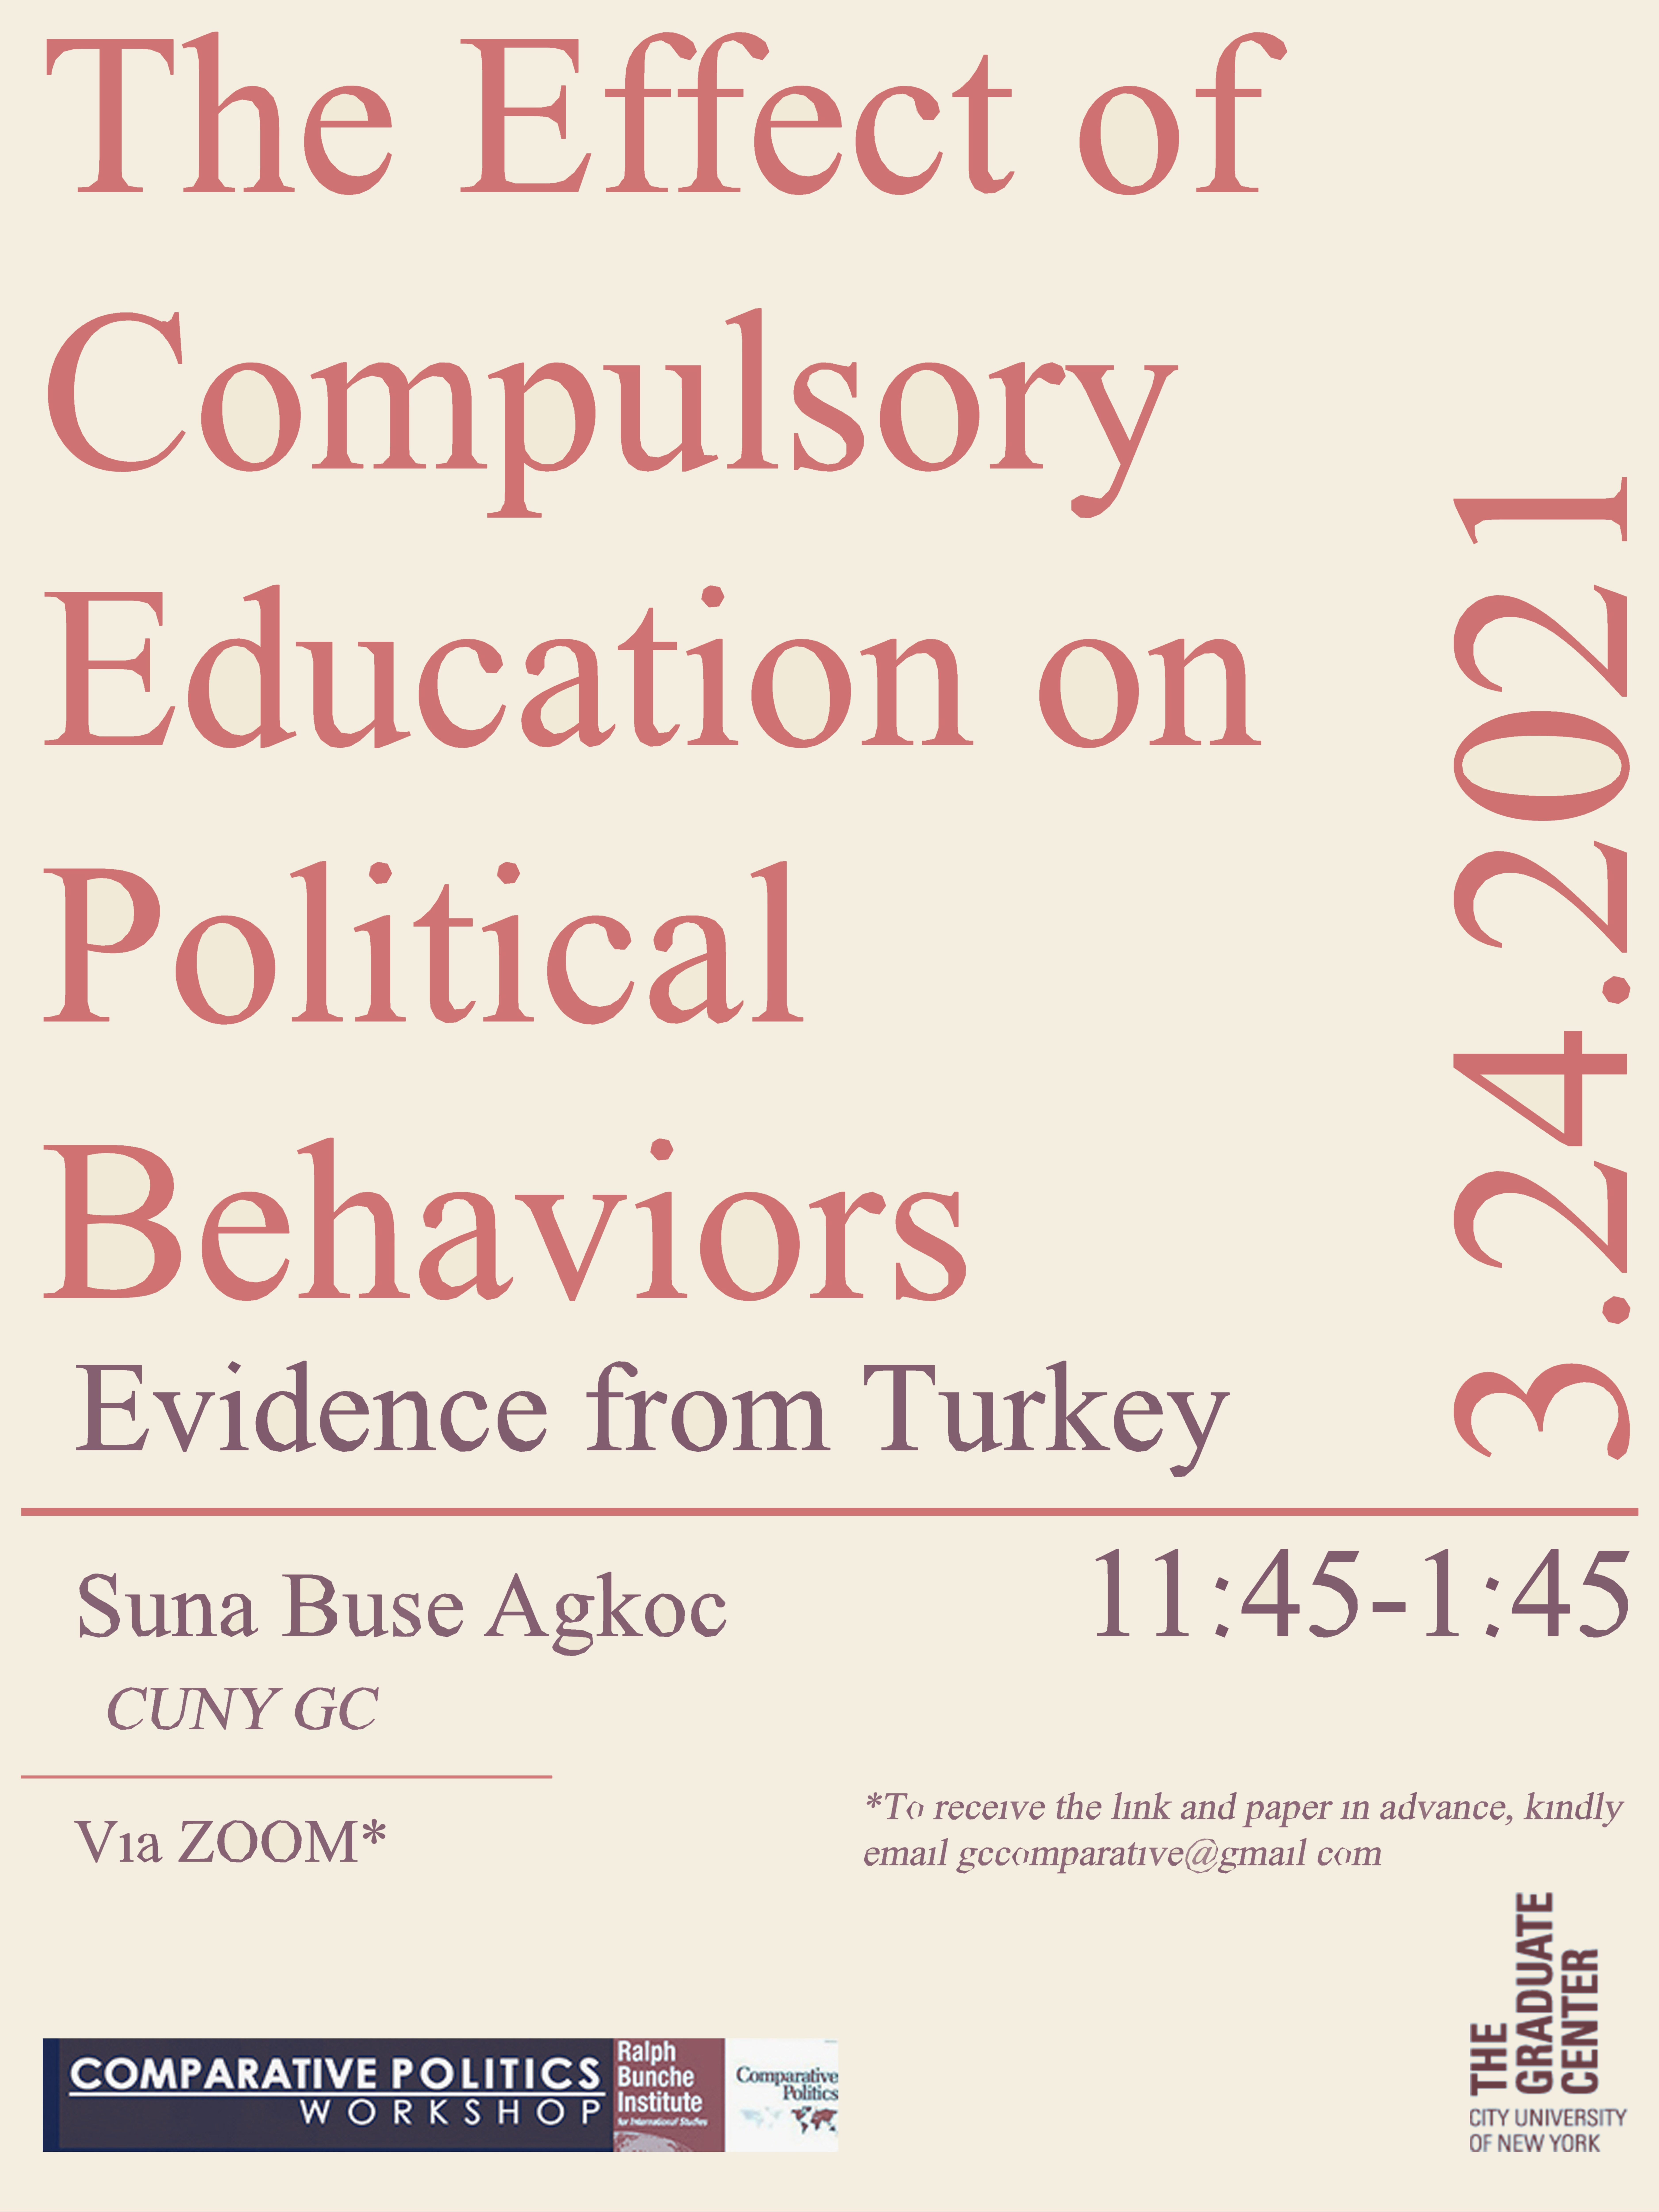 Comparative Politics Workshop: Suna Buse, "The Effect of Compulsory Education on Political Behaviors: Evidence from Turkey," Wednesday, March 24, 11:45am-1:45pm